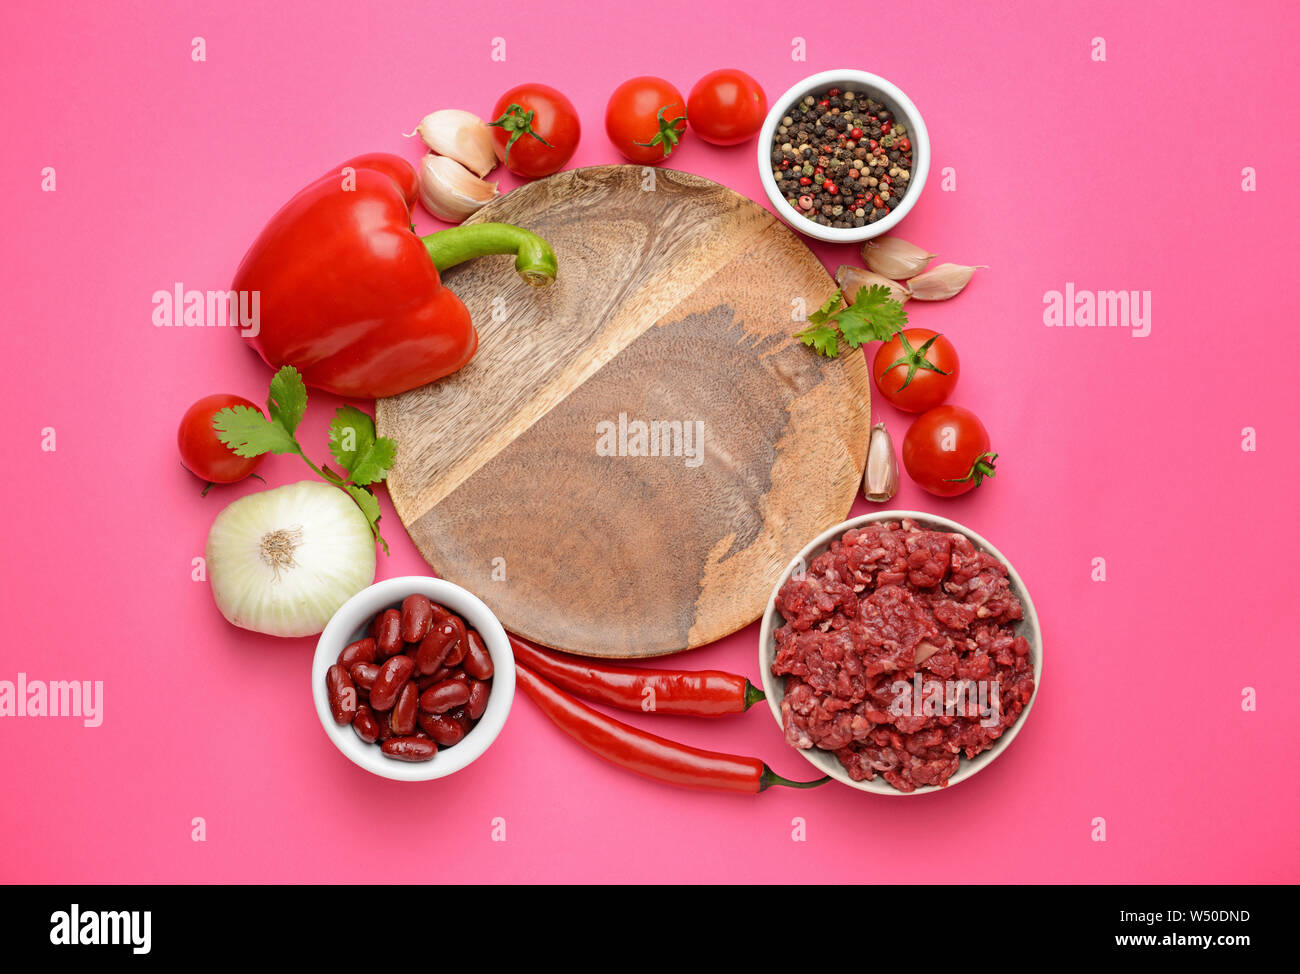 Ingredients for chili con carne with plate on color background Stock Photo